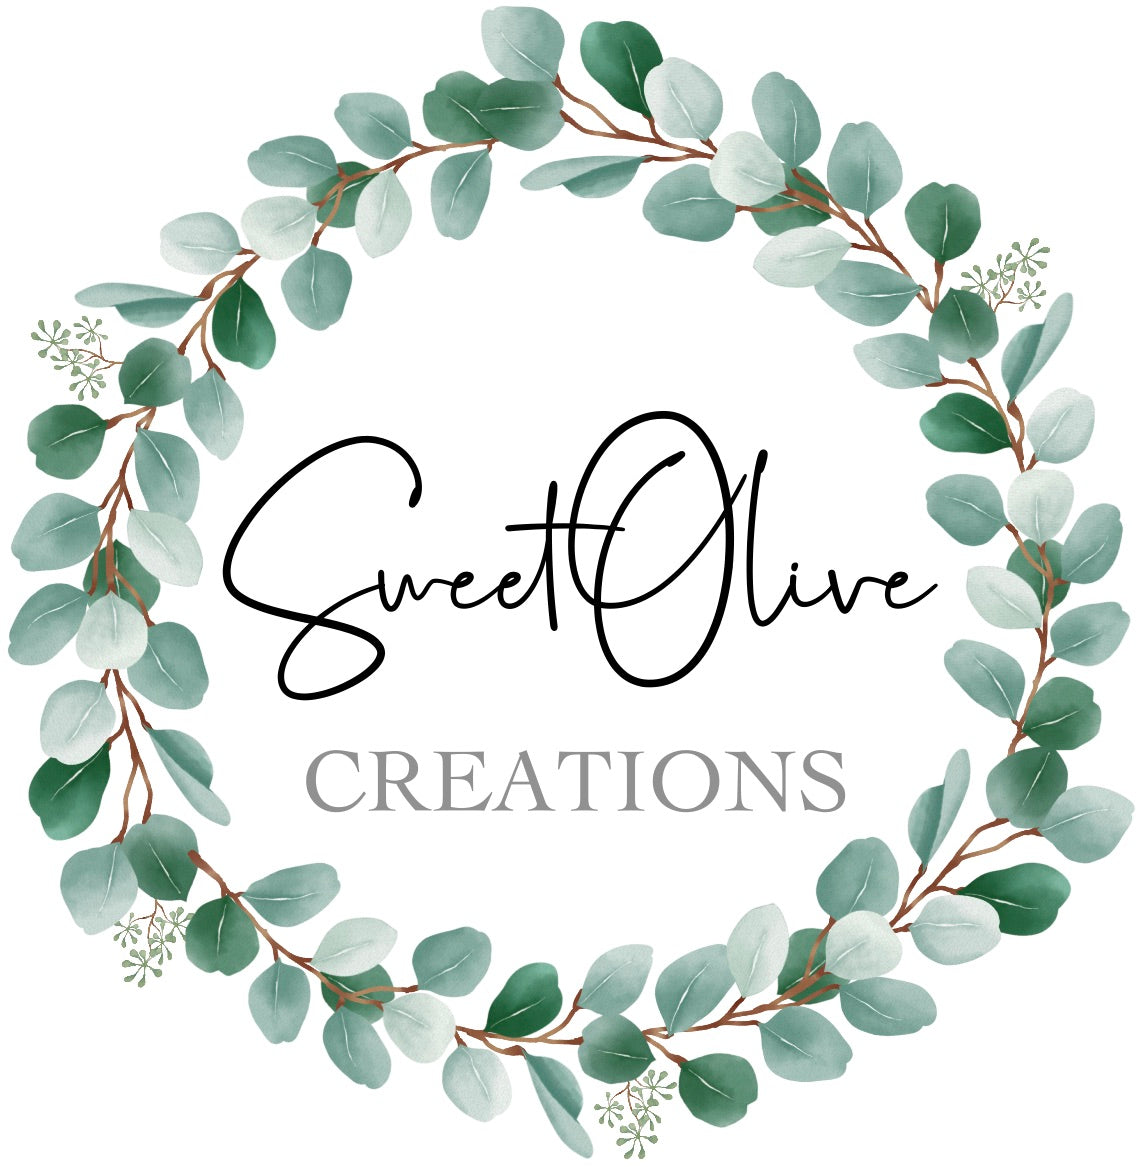 Sweet Olive Creations